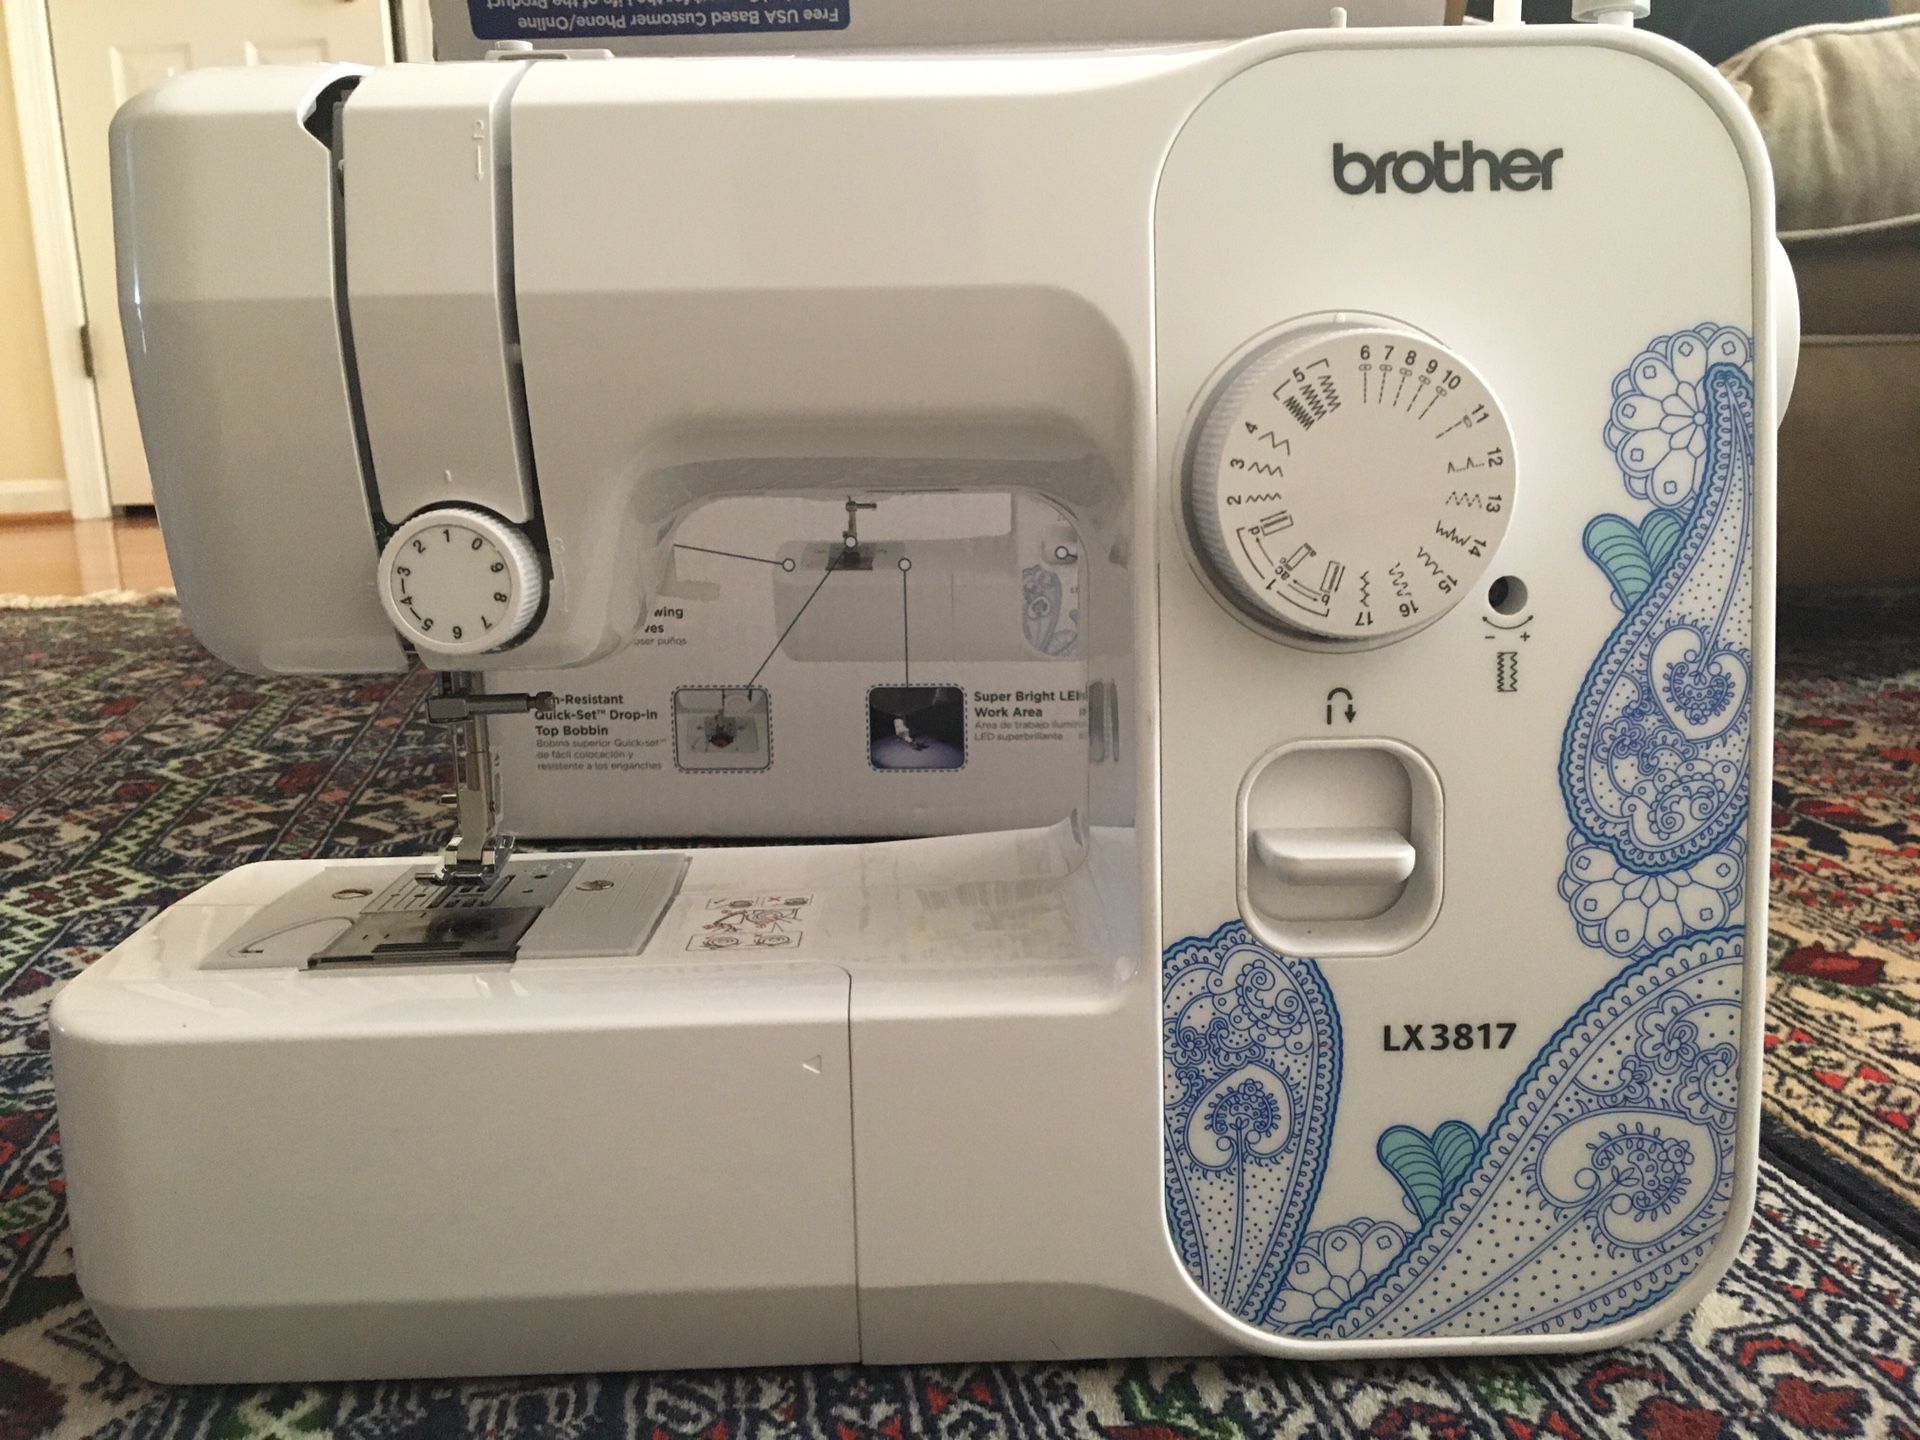 Lx 3817 brother sewing machine